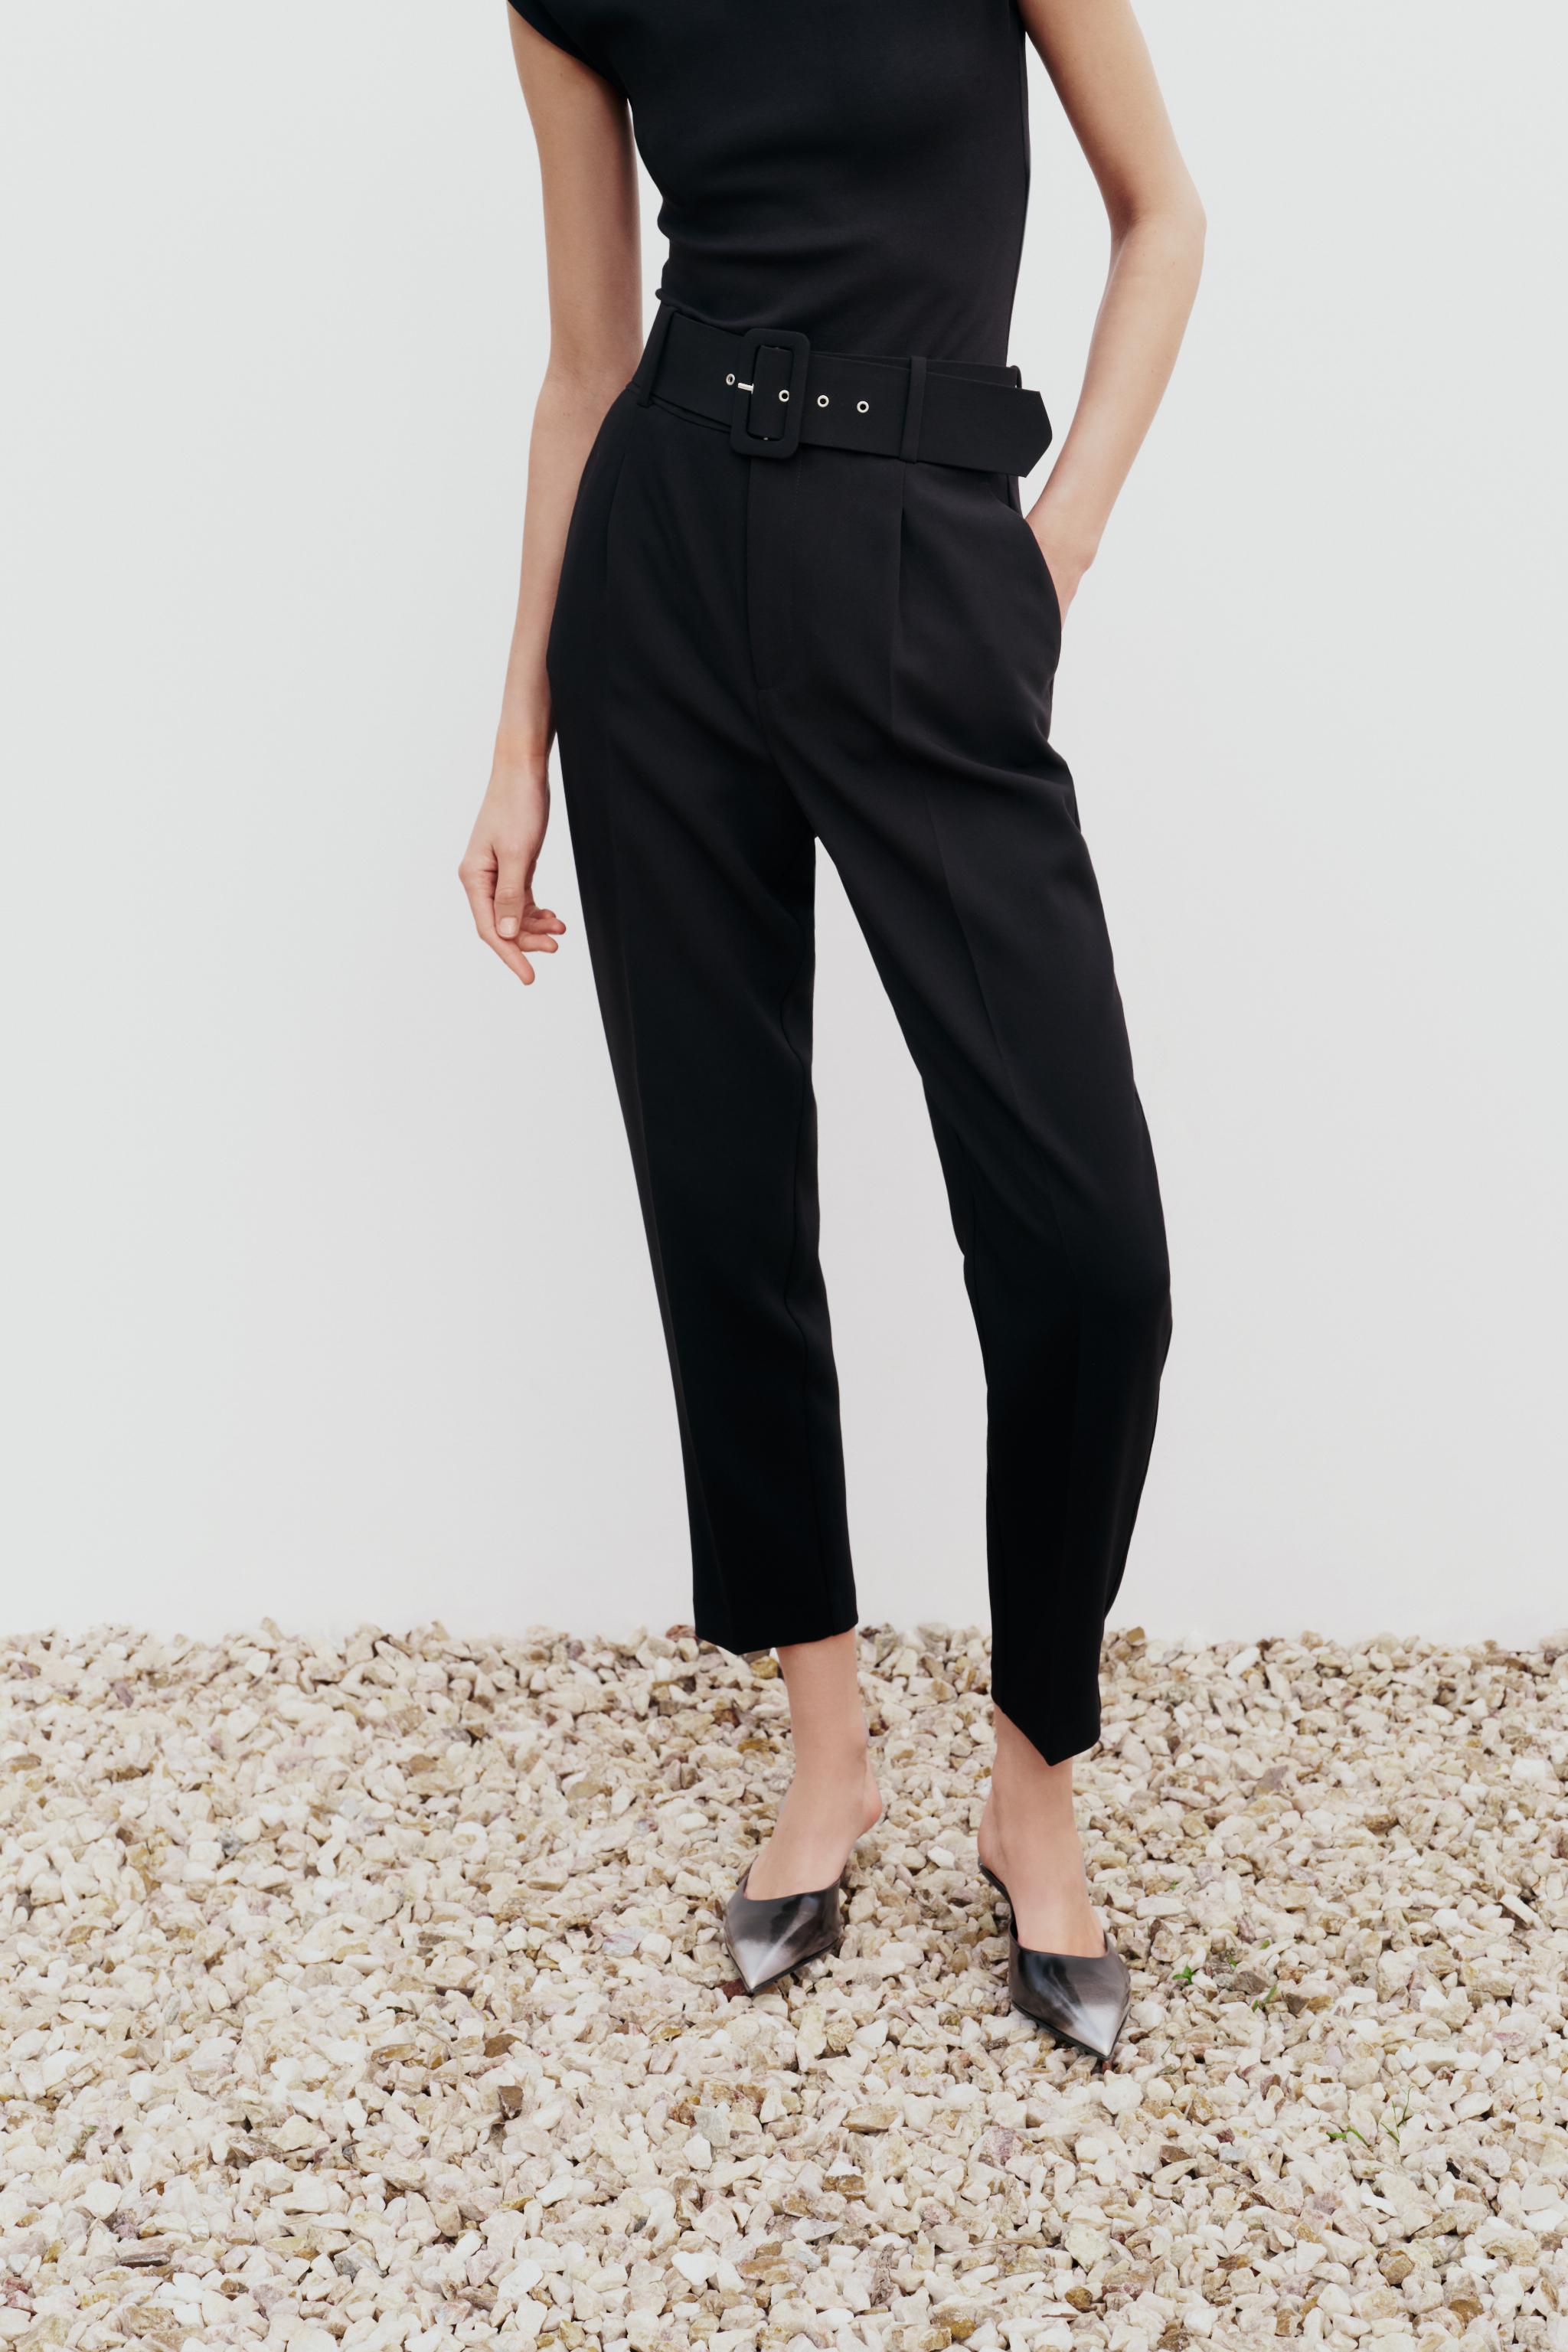 ZARA WOMEN'S HIGH WAISTED PANTS WITH FABRIC COVERED BELT BLACK